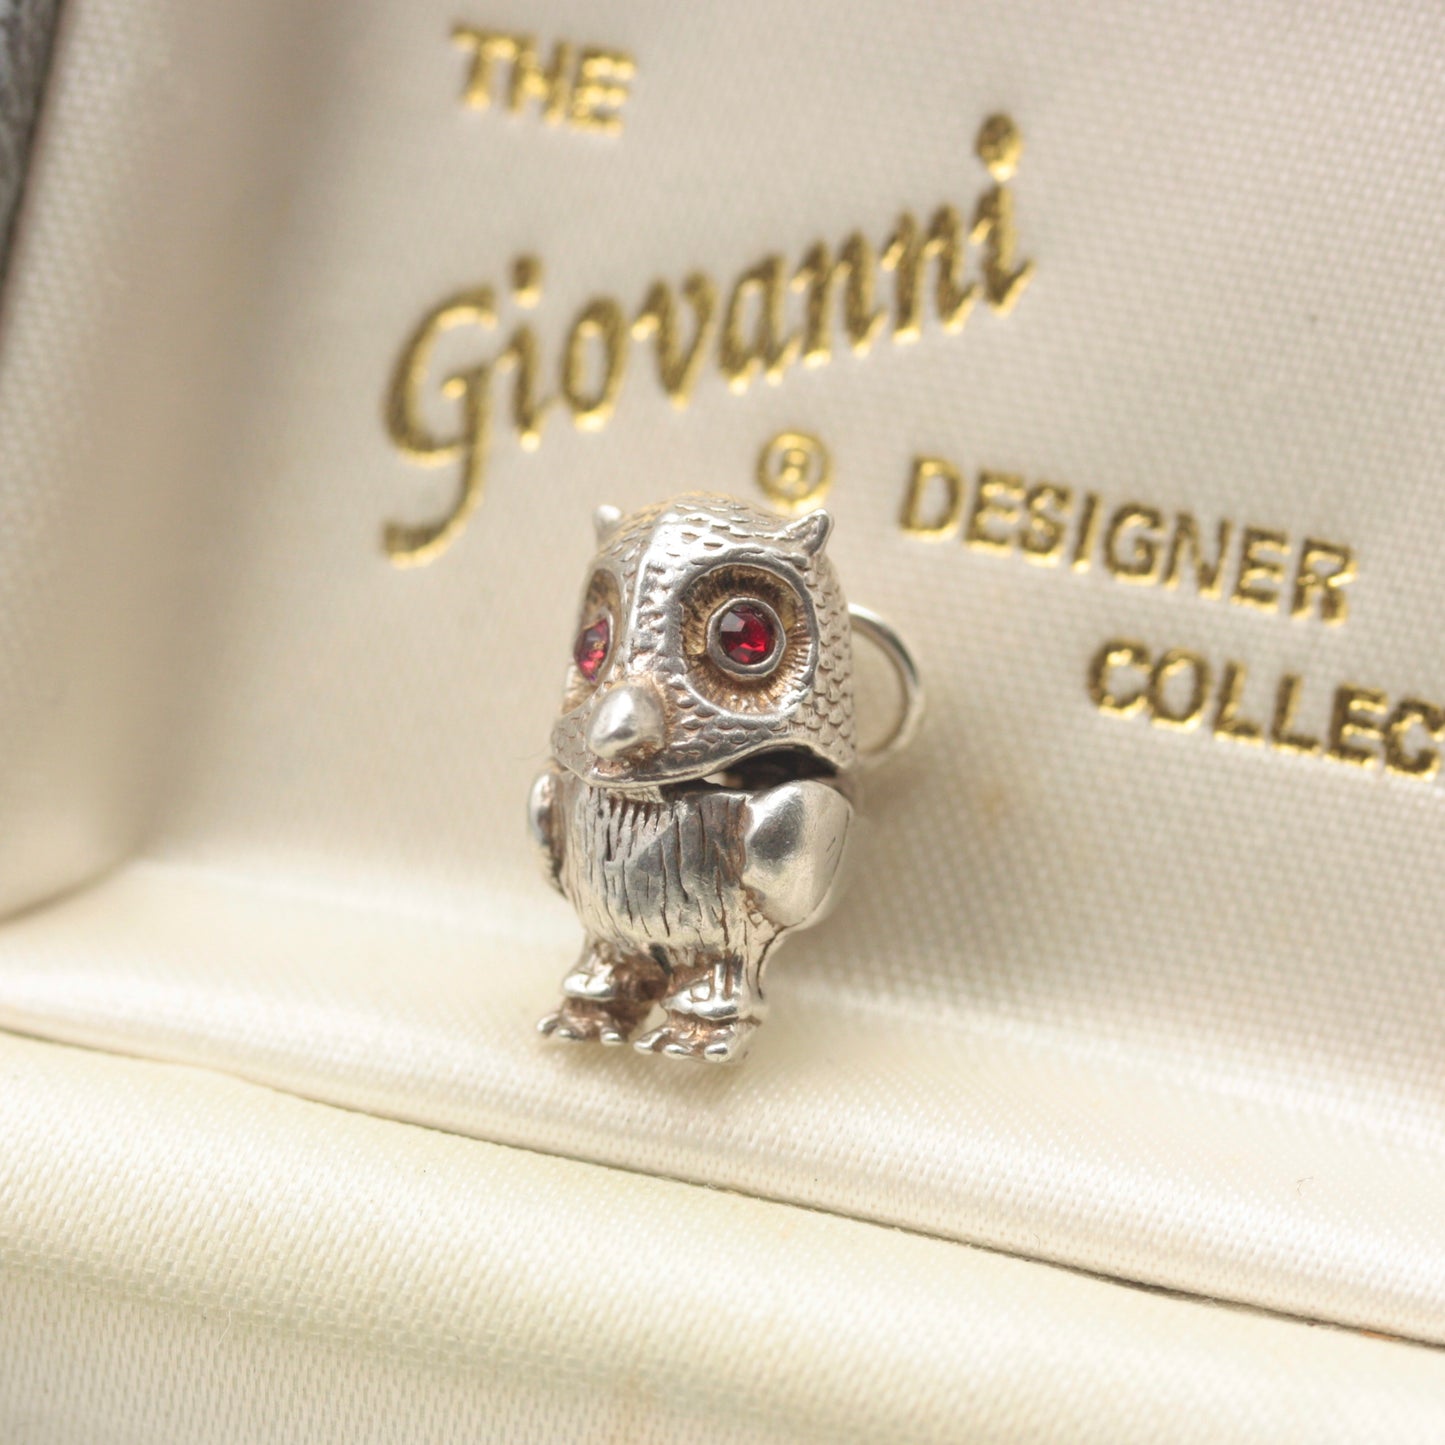 Original Vintage Silver Owl Charm with Red Eyes